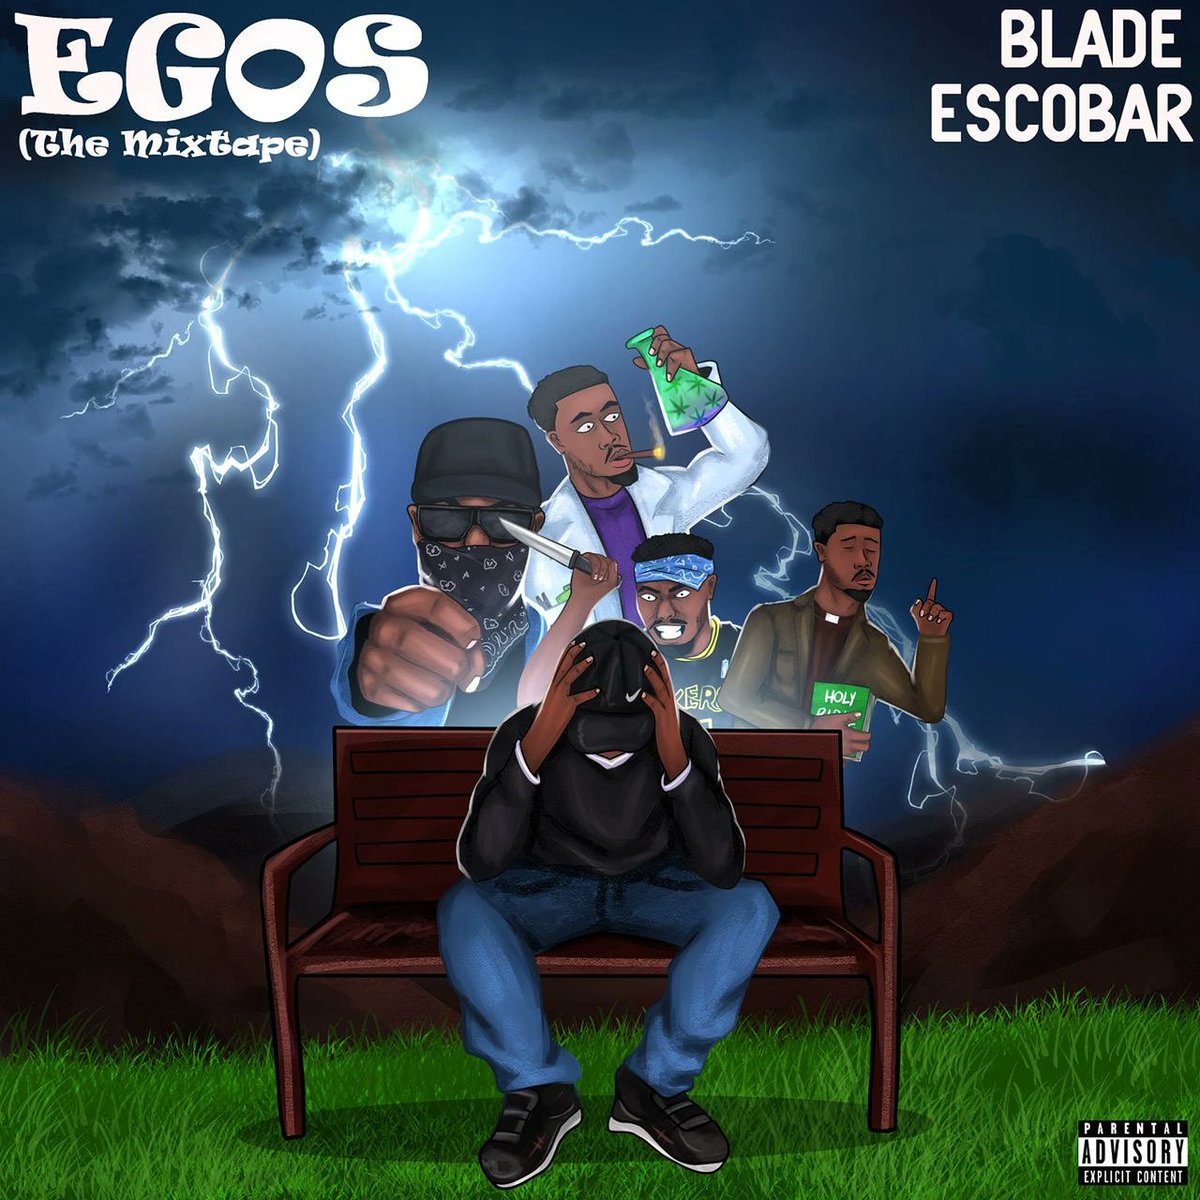 My debut project Egos: The Mixtape drops this Friday. This has been years in the making. I'm so excited to put this out. LET'S GOOOOOOO 🔥🔥🔥🔥🔥🔥🔥🔥🔥🔥🔥🔥